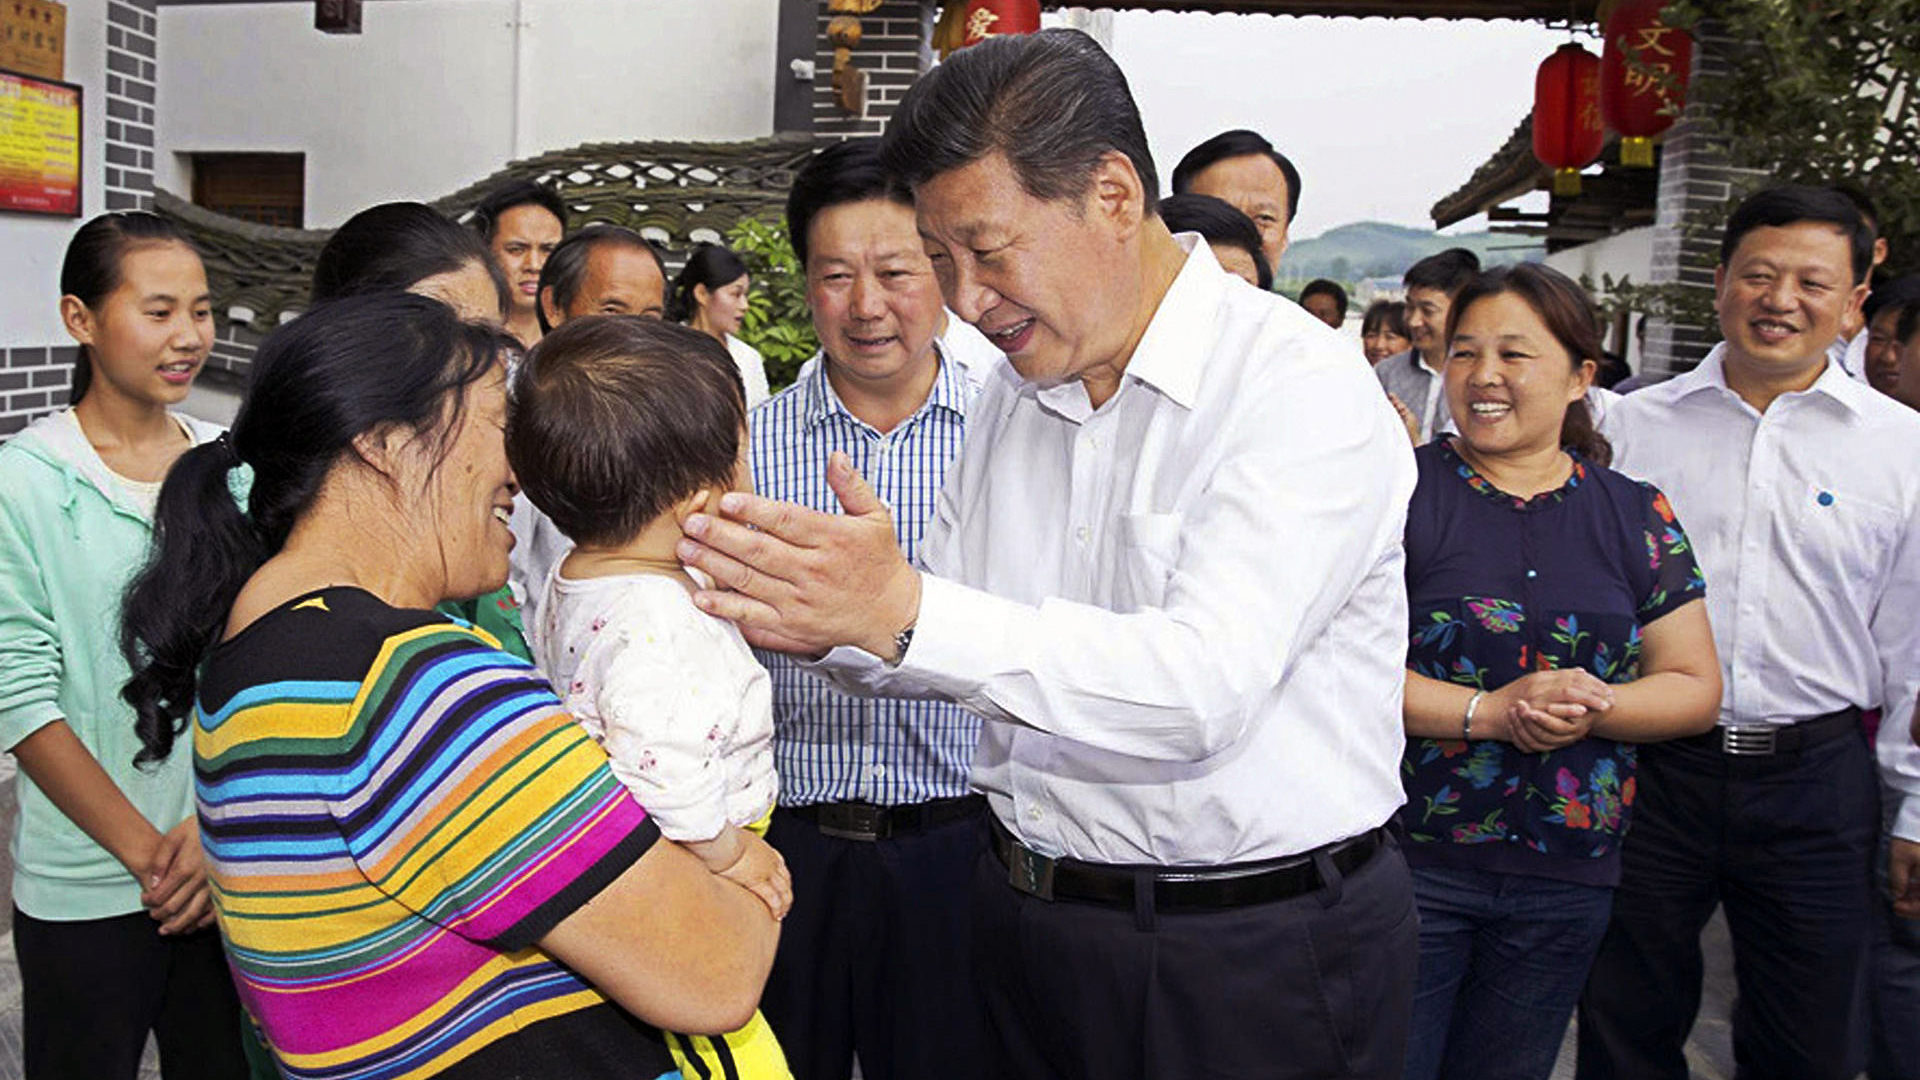 President Xi Jinping talks with villagers in impoverished Guizhou province's Huamao village to find out more about their daily lives. Photo: Xinhua